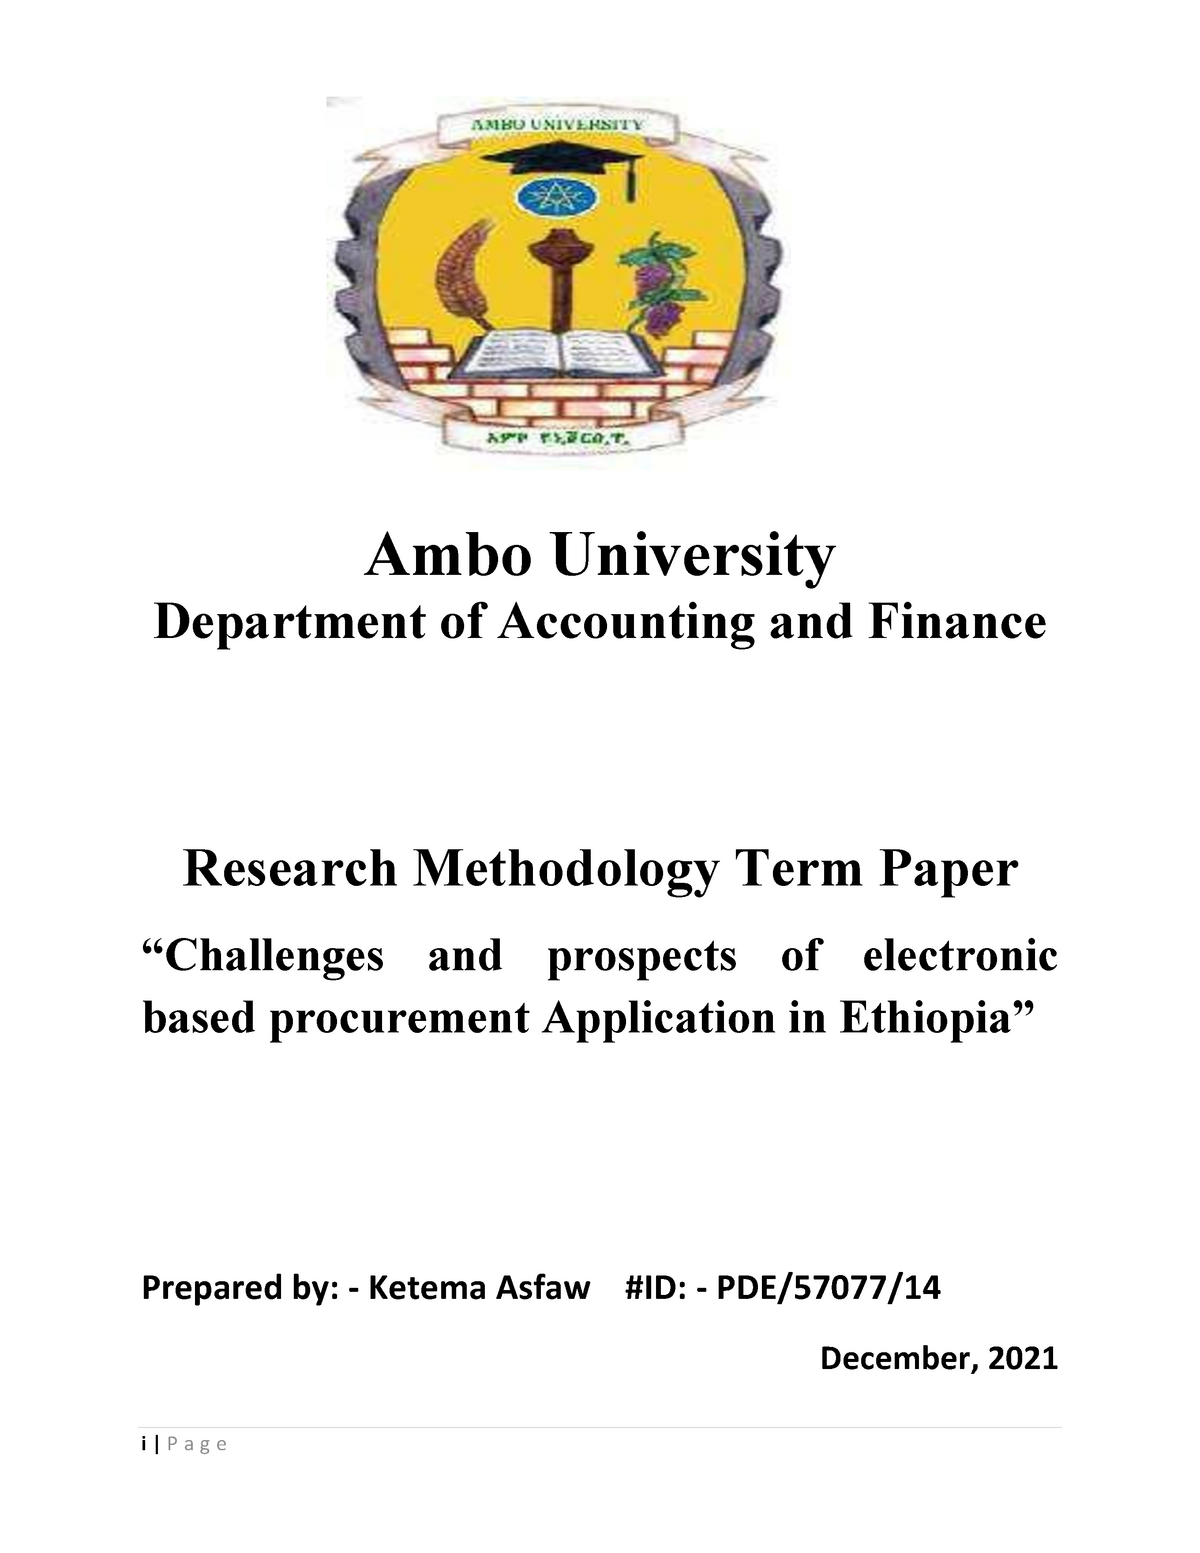 finance department research paper